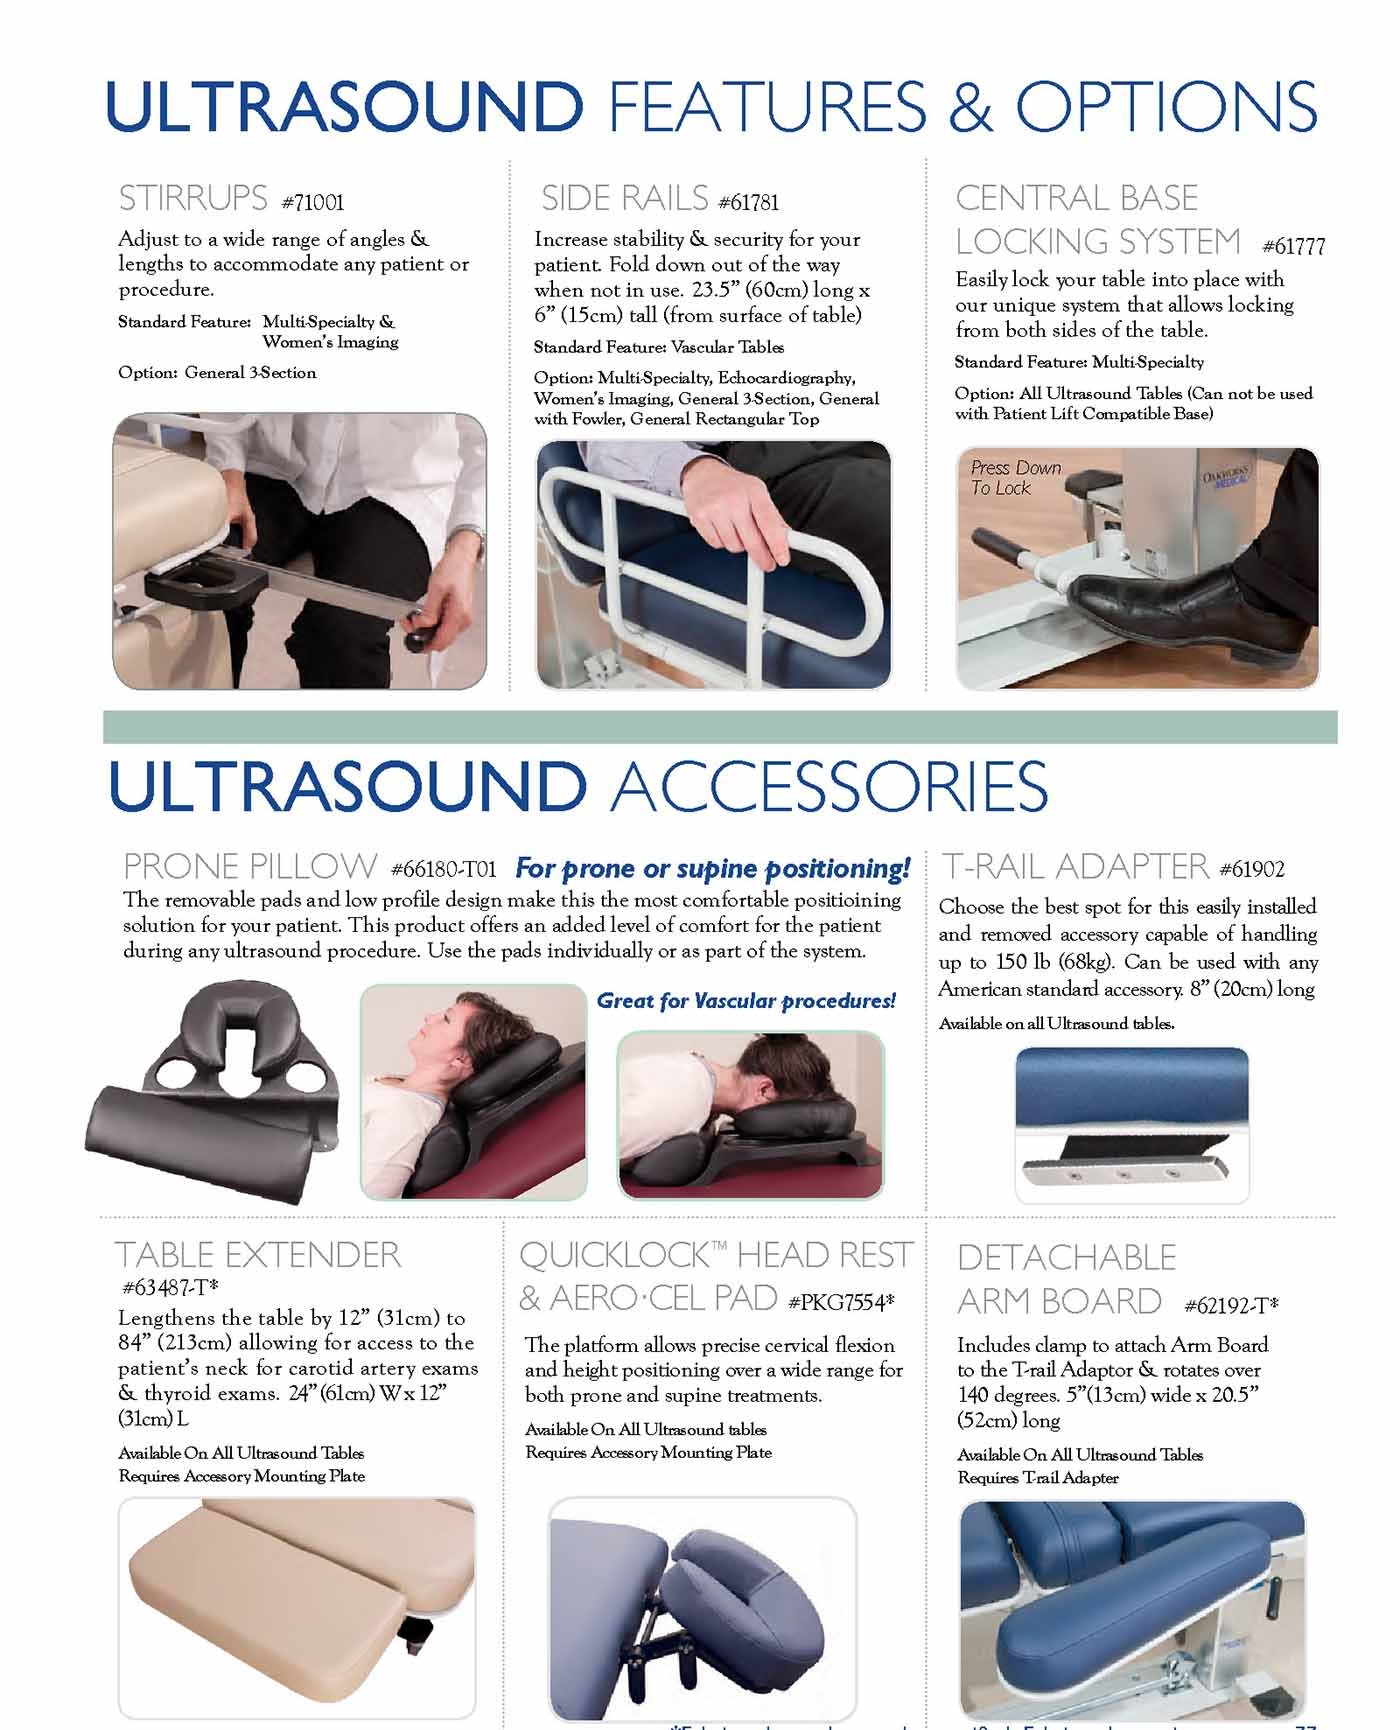 Arrow Life Medical Solution - ULTRASOUND Tables FEATURES, accessories and OPTIONS